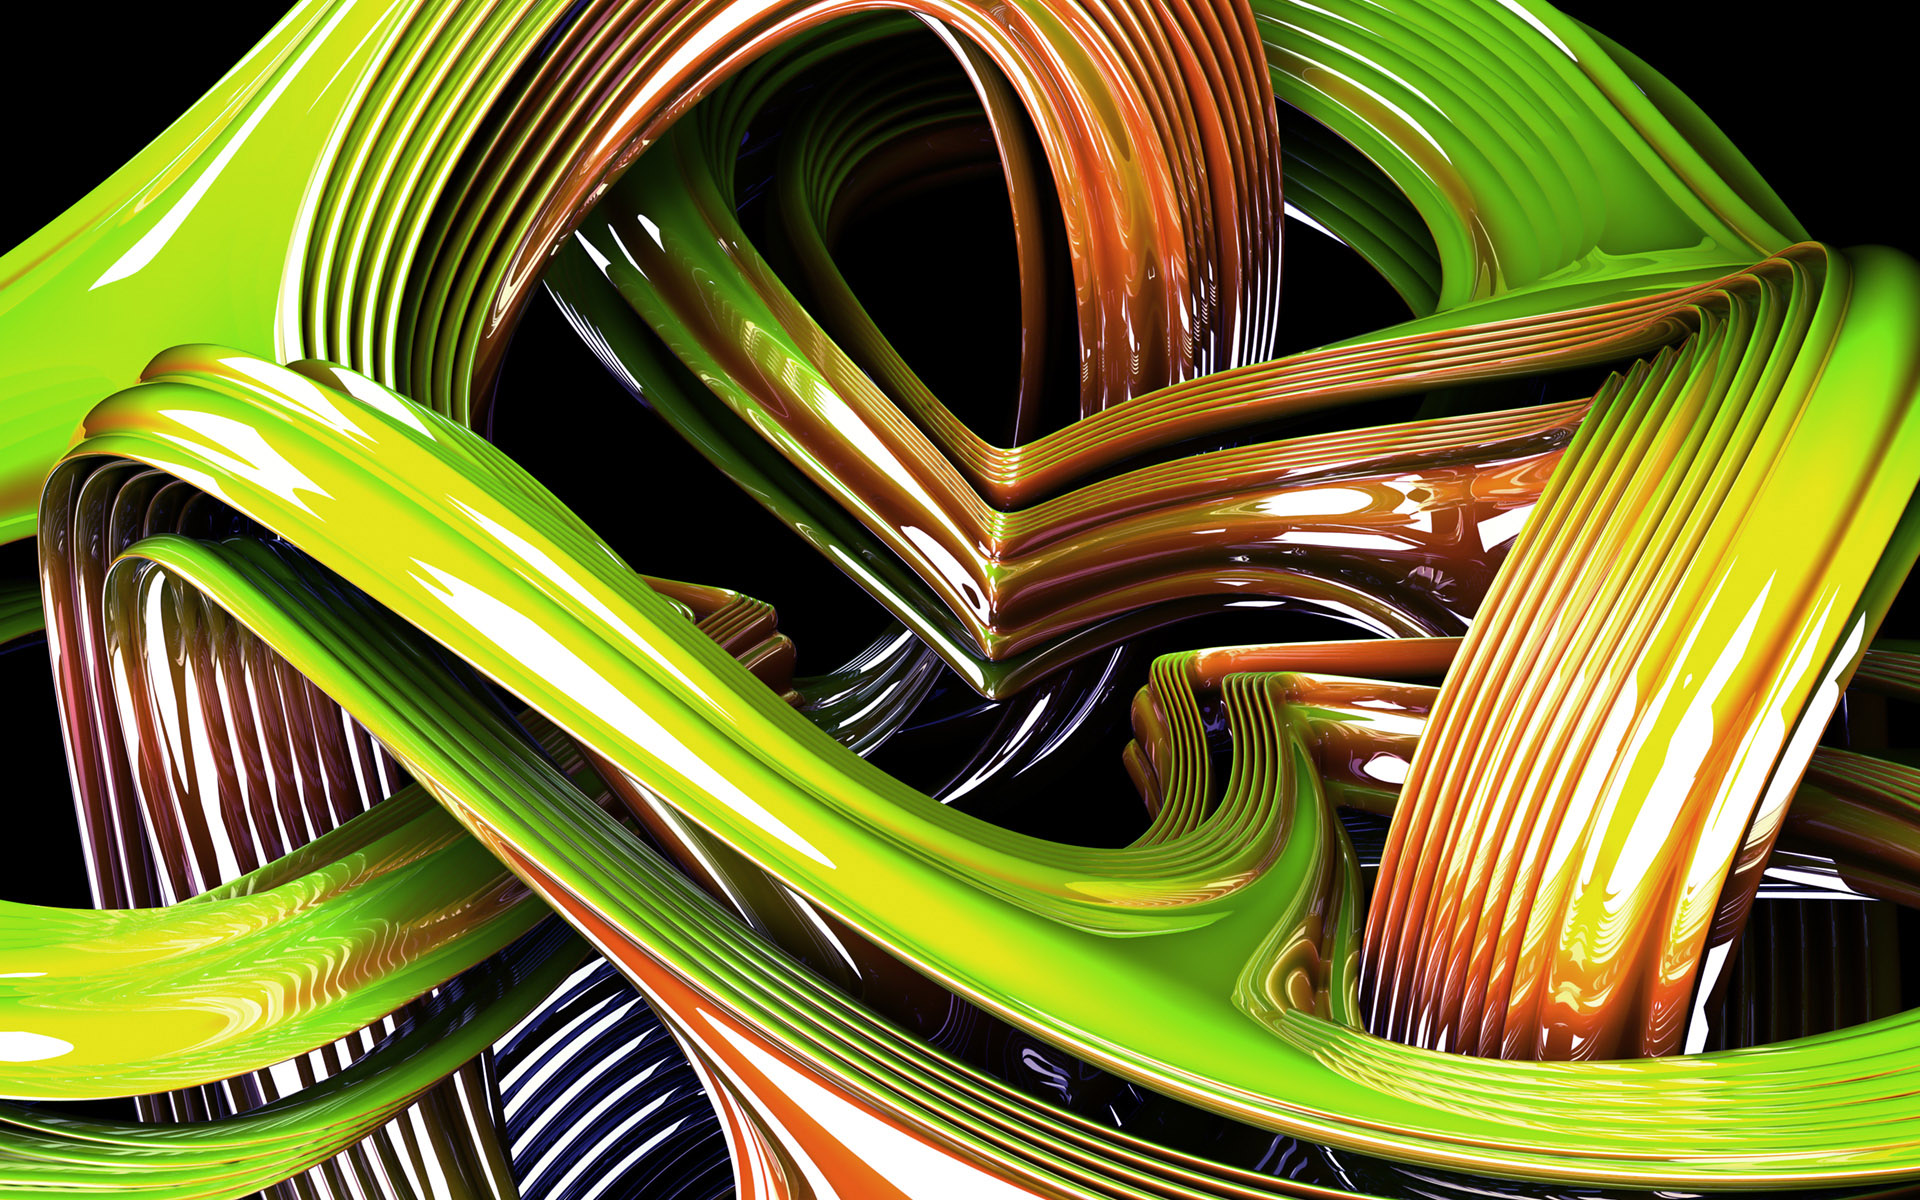 Graphic 3D HD Abstract Desktop Backgrounds